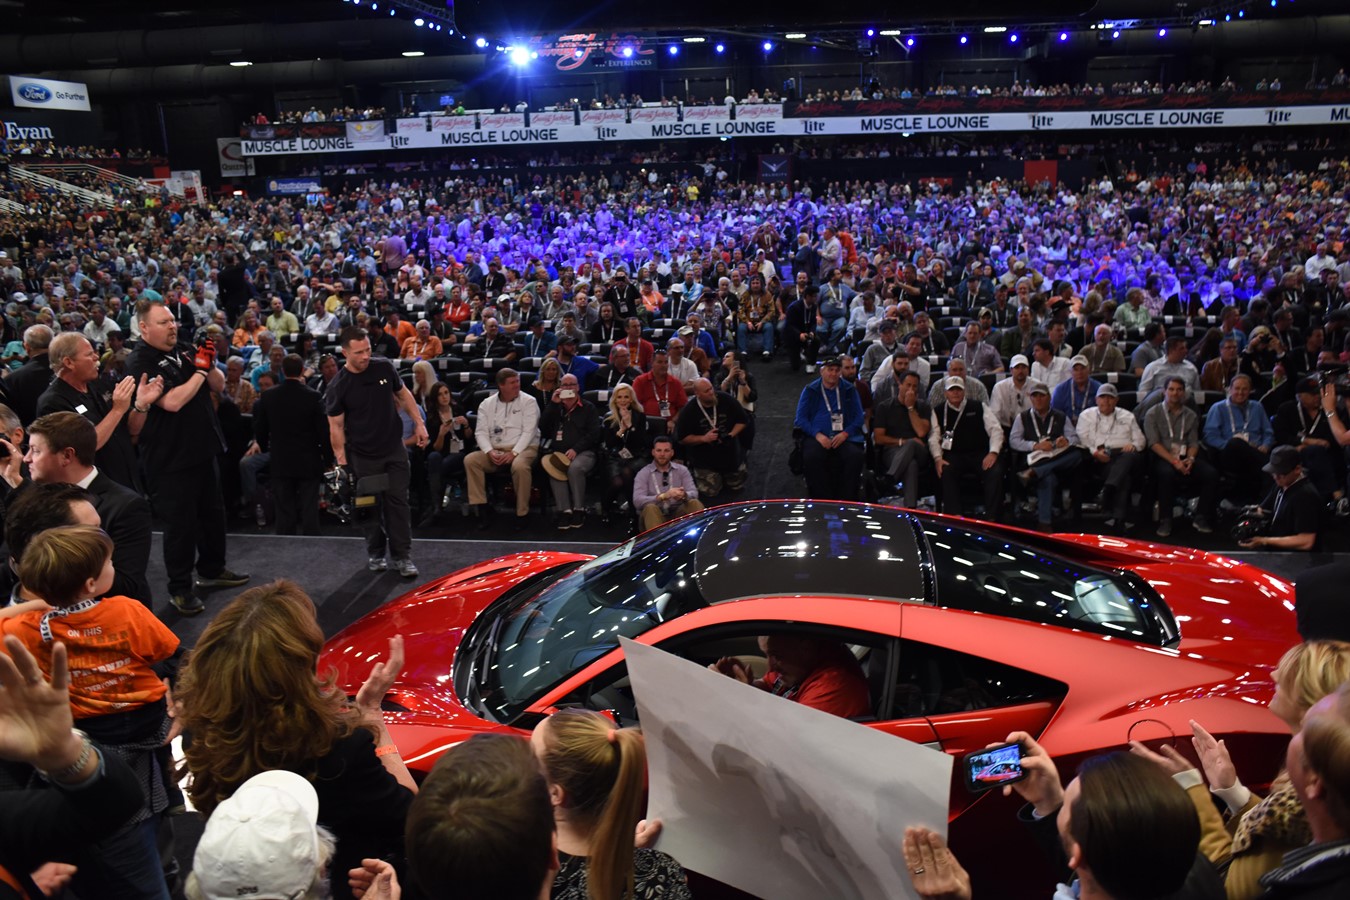 First production model of all-new Acura NSX fetches almost ten times its book price at auction